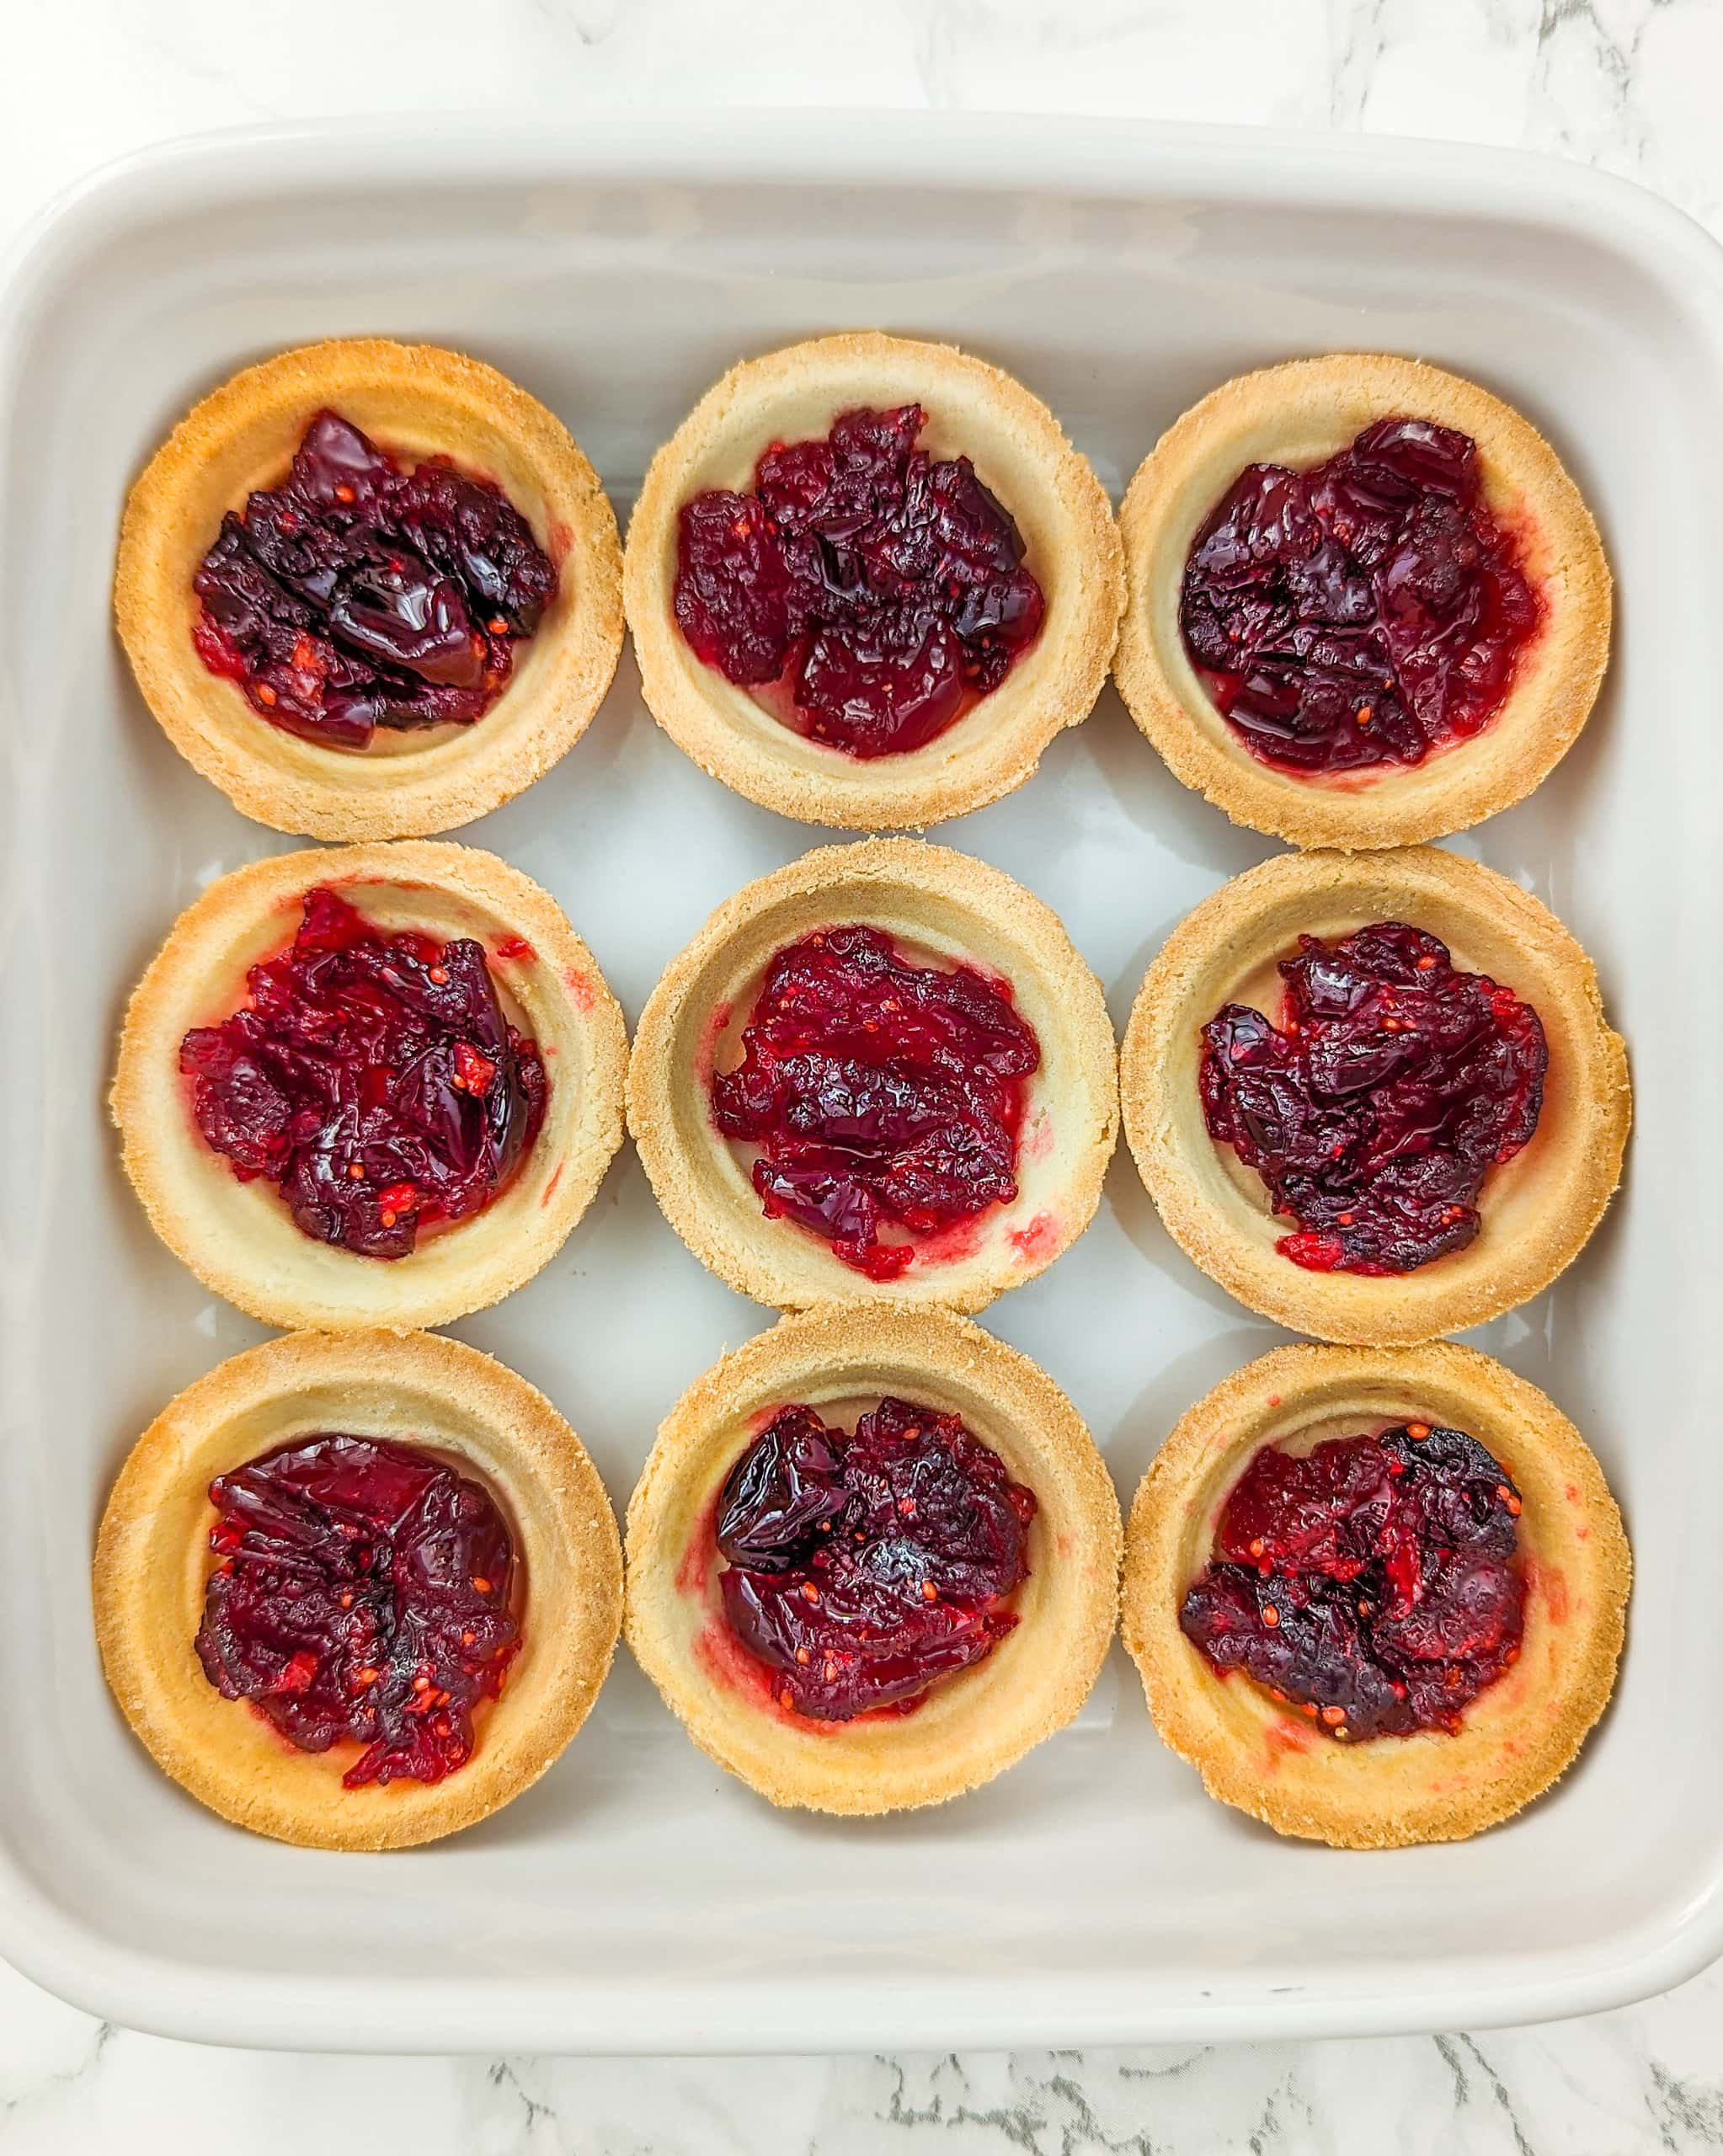 White traybake with cranberry jam in 9 tartlets on a white surface.